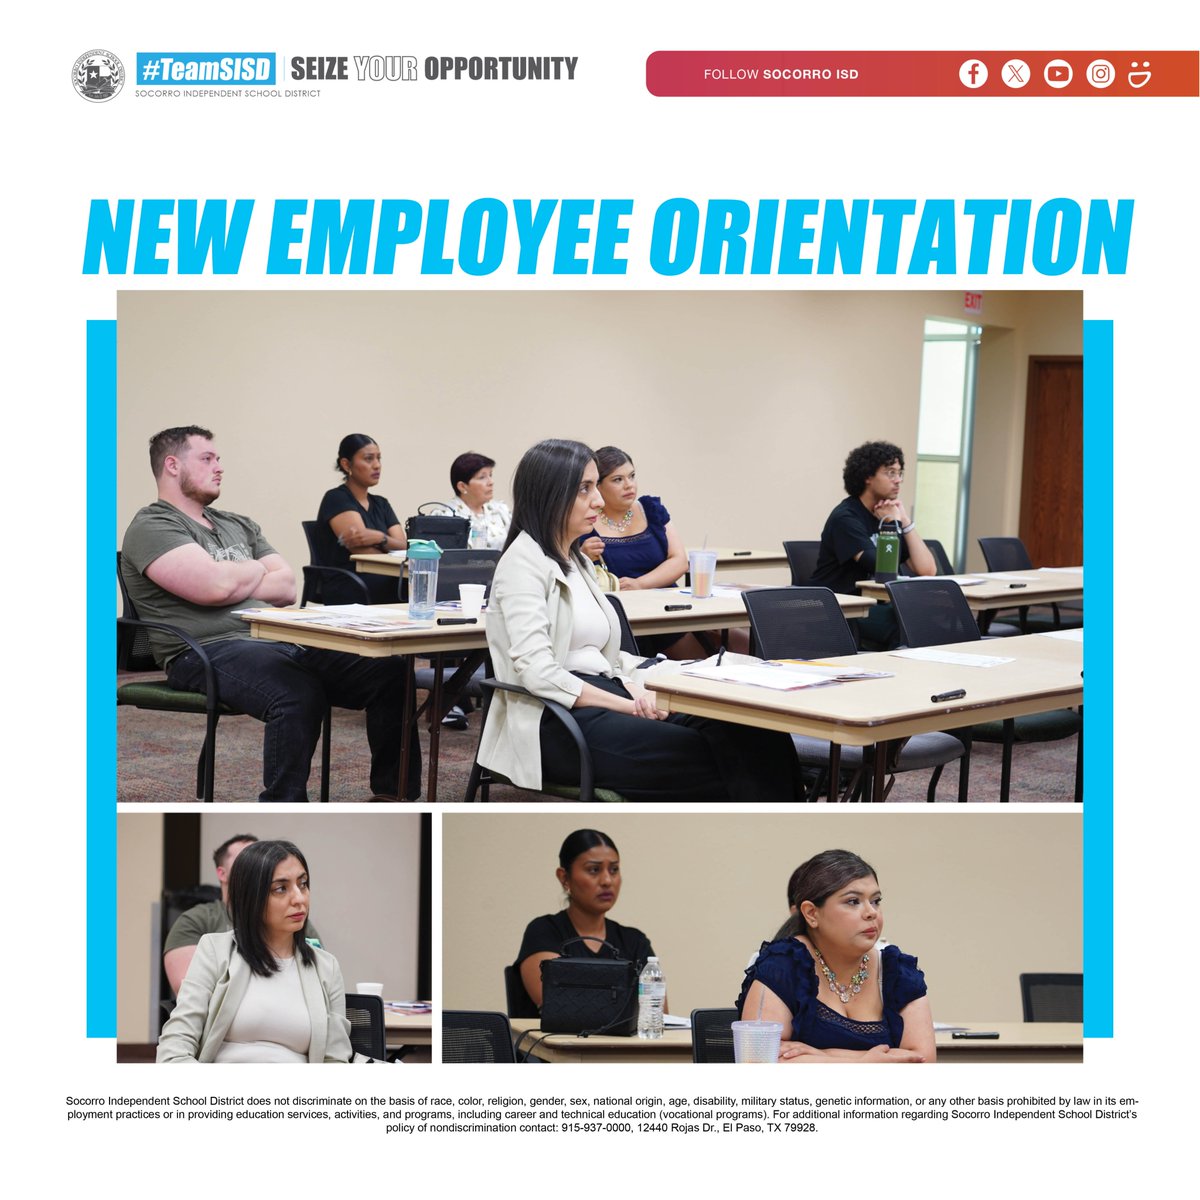 #TeamSISD The Department of Human Resources is happy to announce and welcome new teachers and paraprofessionals as they begin their journey with @SocorroISD!🤓🥳👏🍎🧑‍🏫😄 #SeizeYourOpportunity